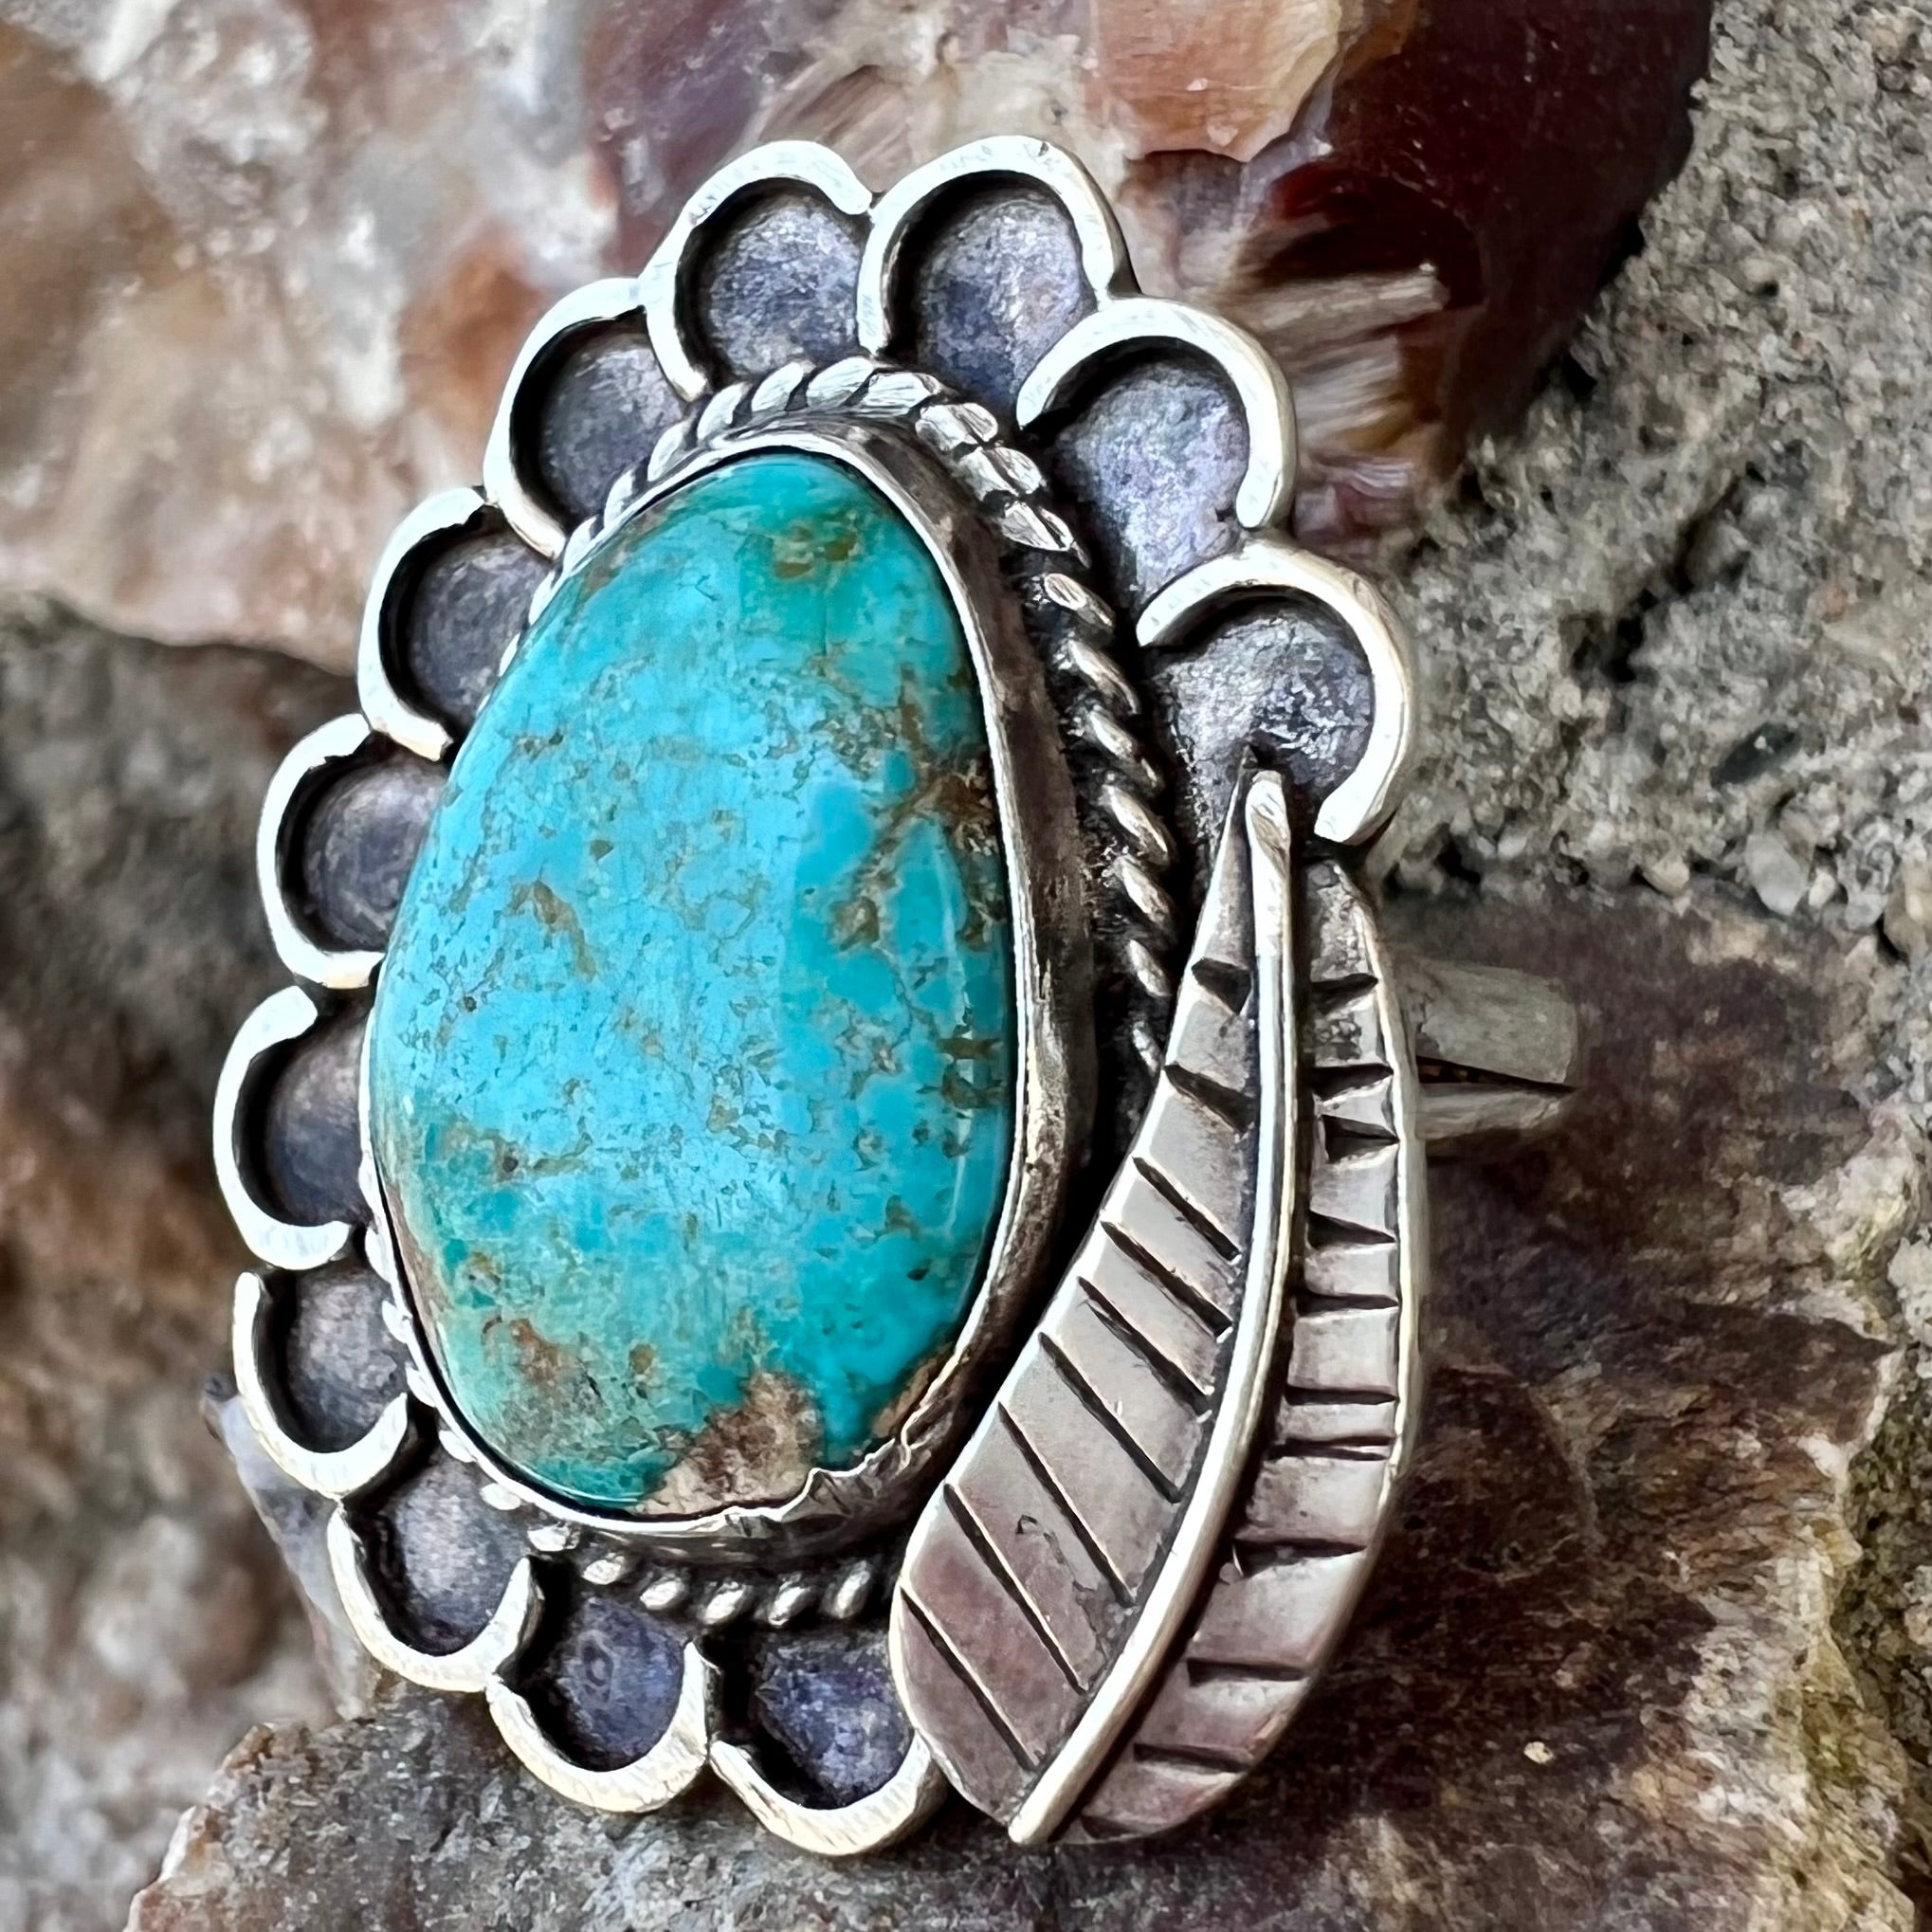 Straight Shooter Slender Blue Turquoise Beth Dutton Ring | Yellowstone -  Objects of Beauty